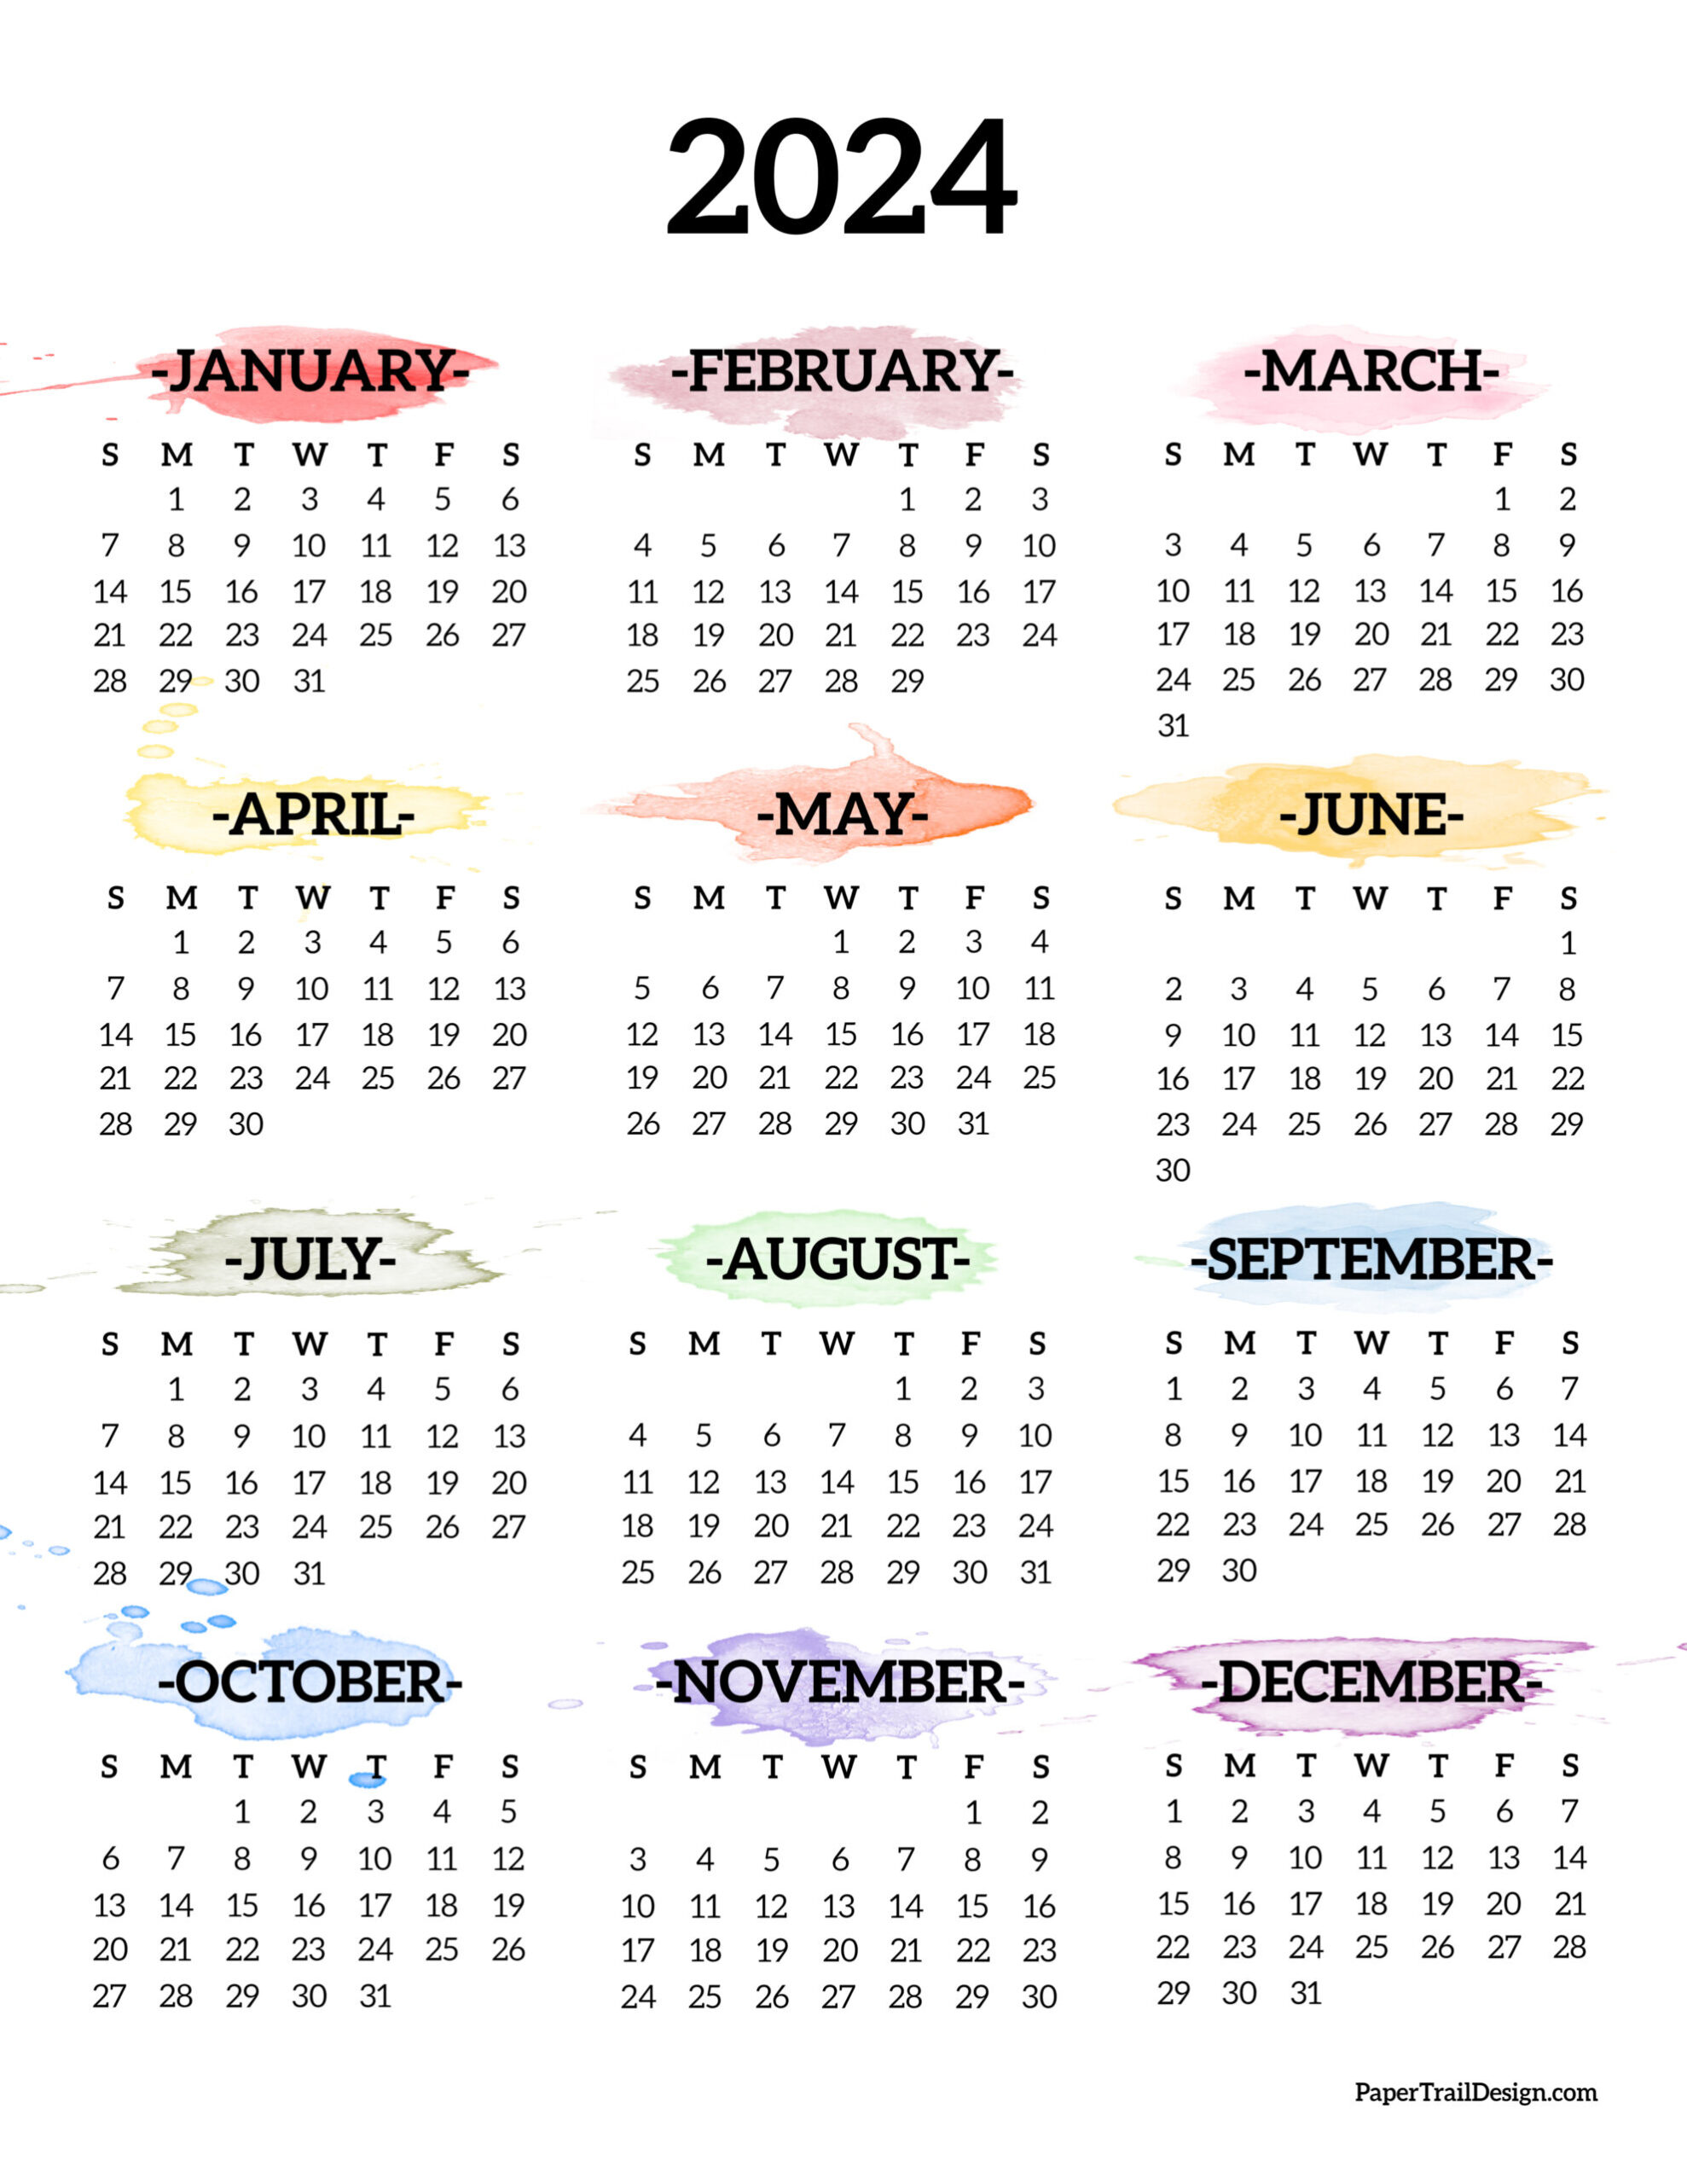 Calendar 2024 Printable One Page - Paper Trail Design for 2024 1 Page Calendar Printable